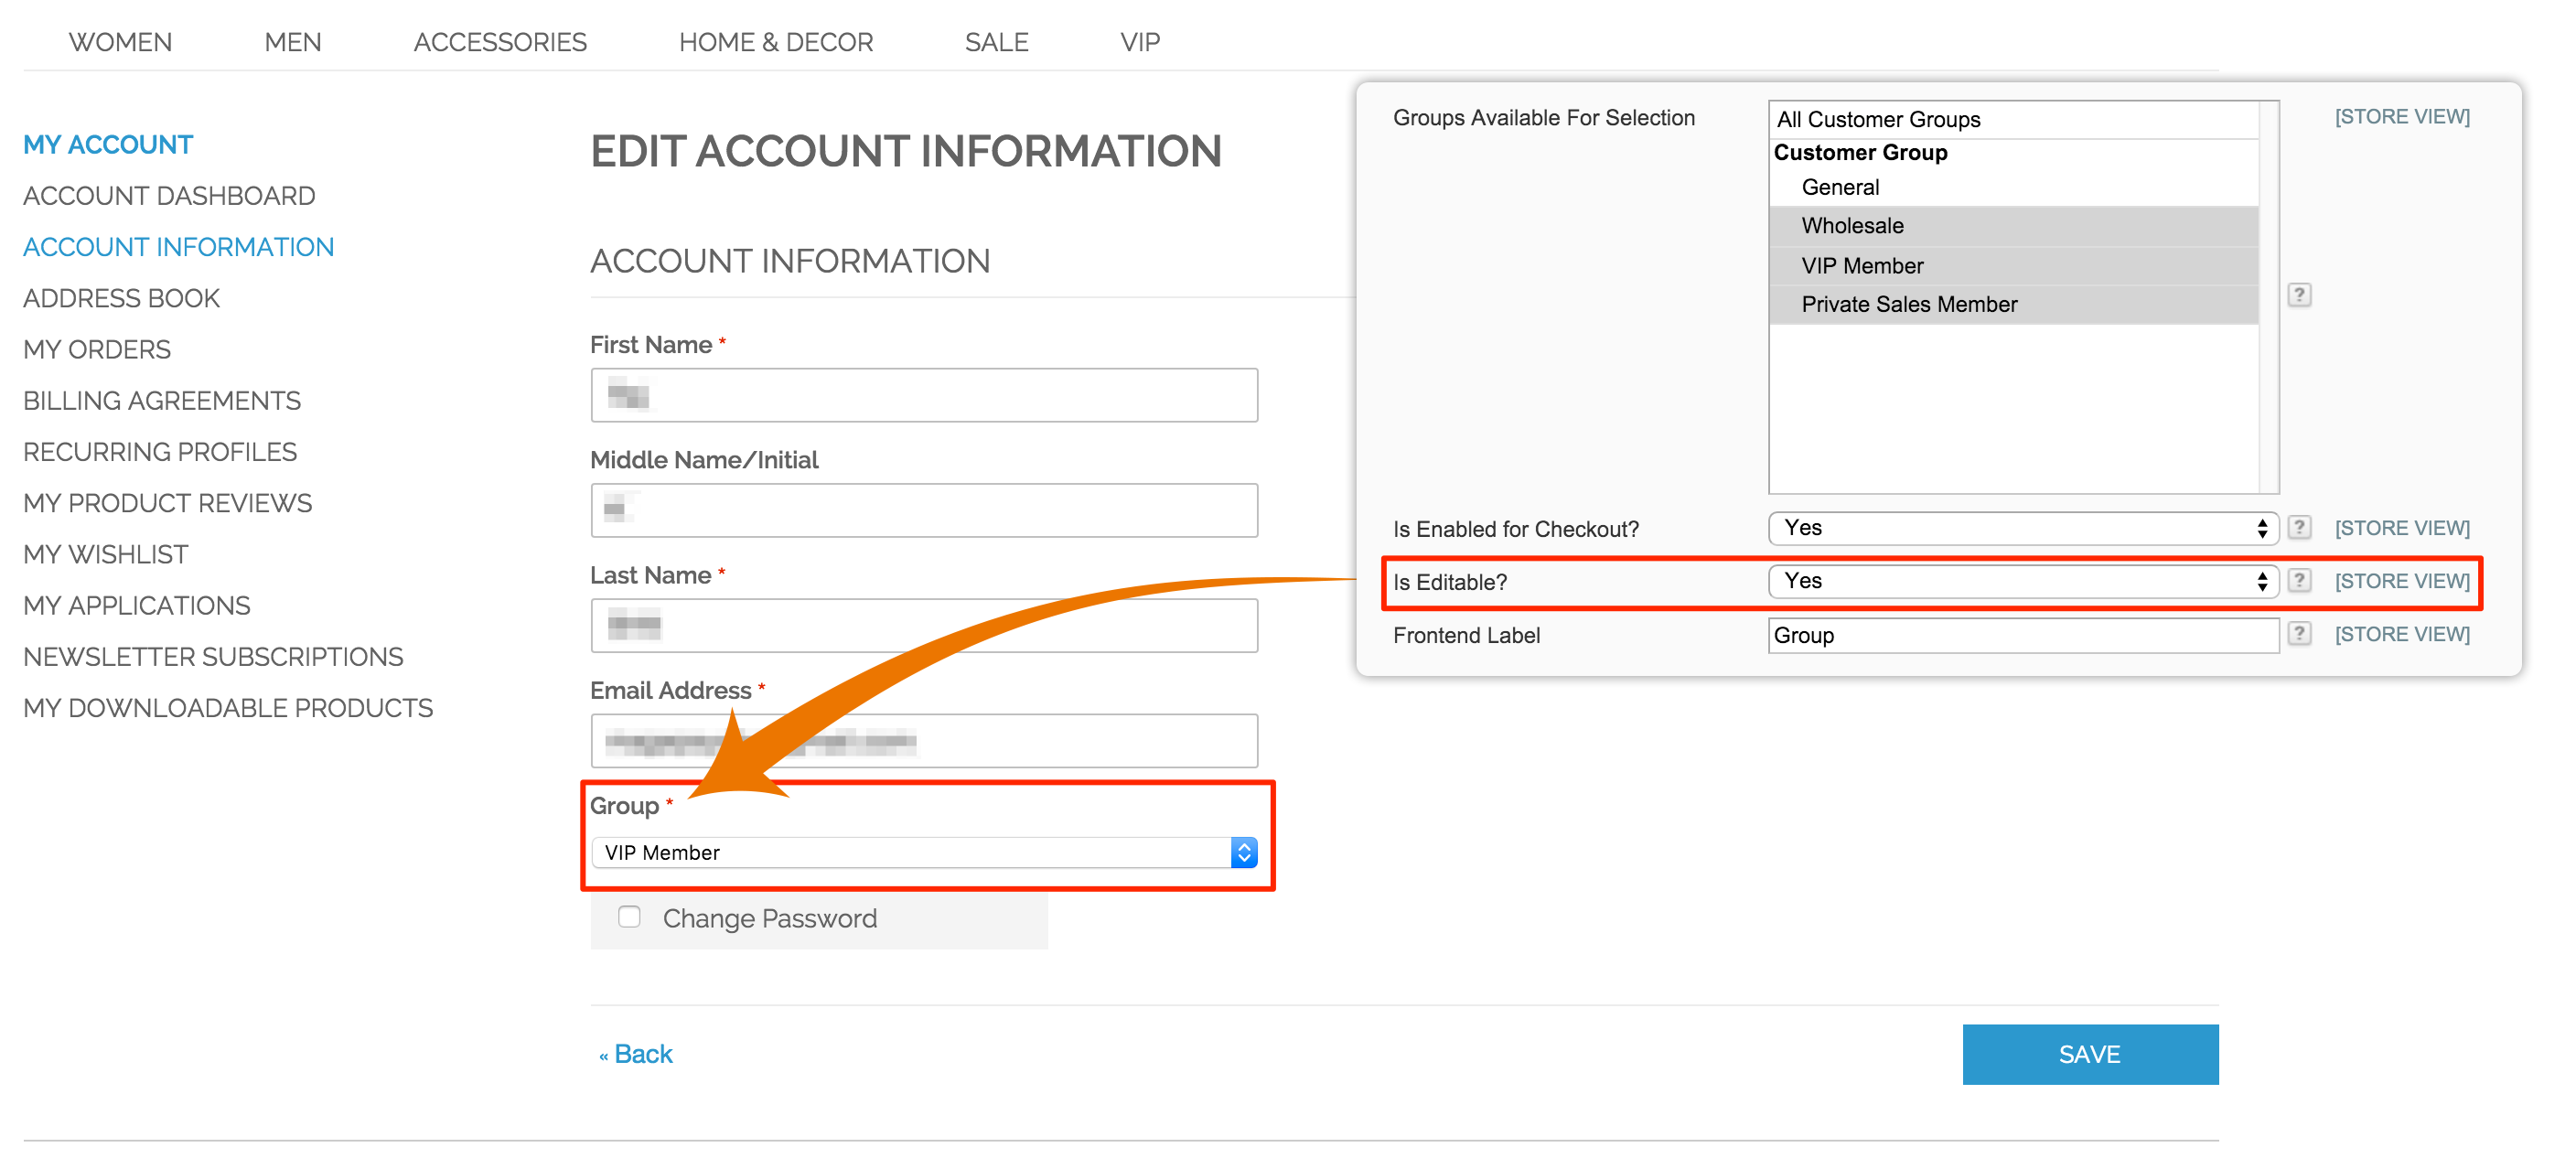 Customer Group Selector Type - Dropdown - My Account Edit Page